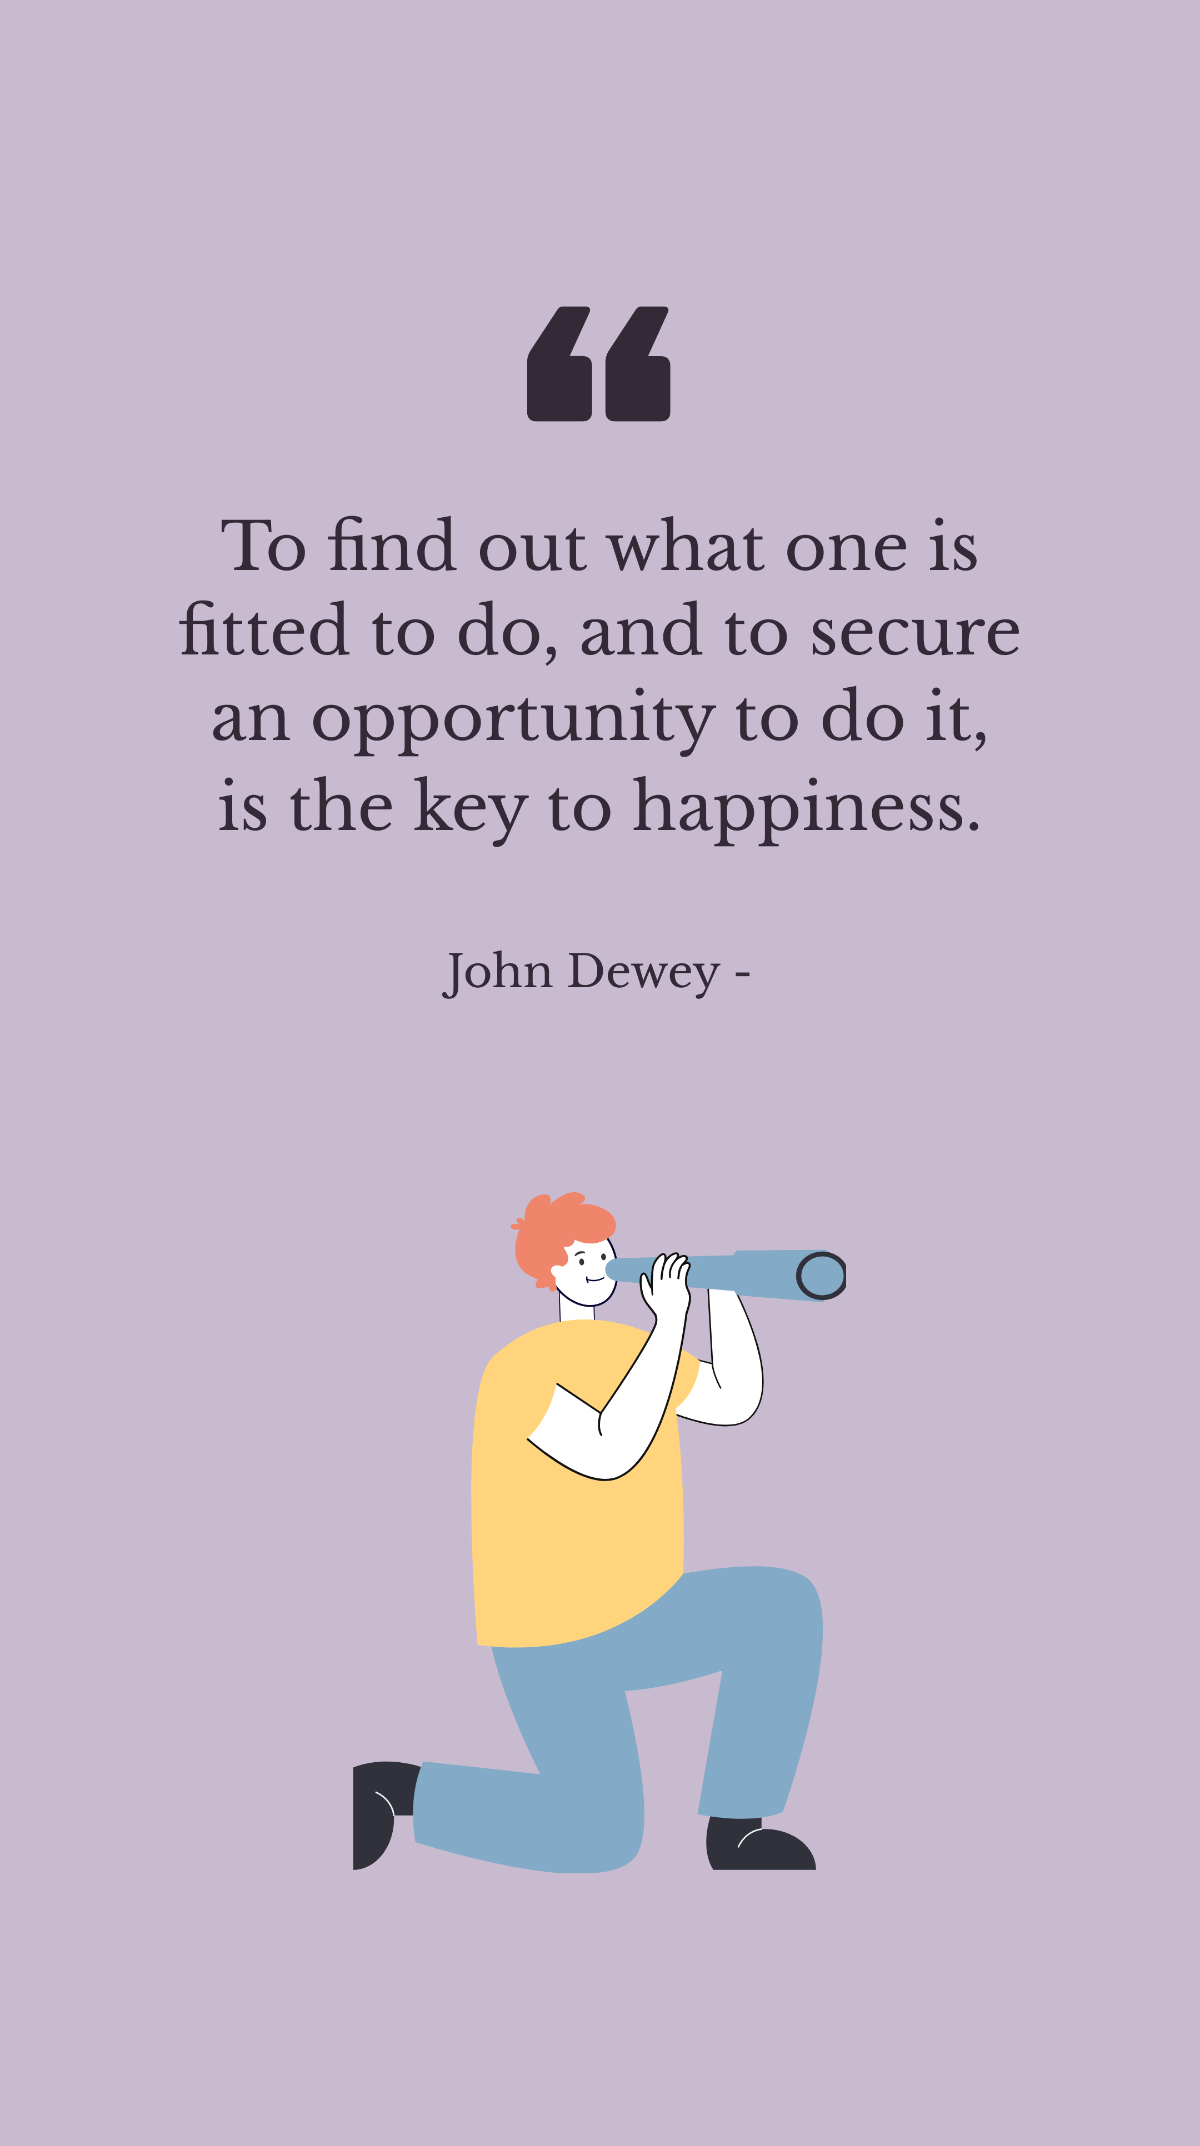 Free John Dewey - To find out what one is fitted to do, and to secure an opportunity to do it, is the key to happiness. Template